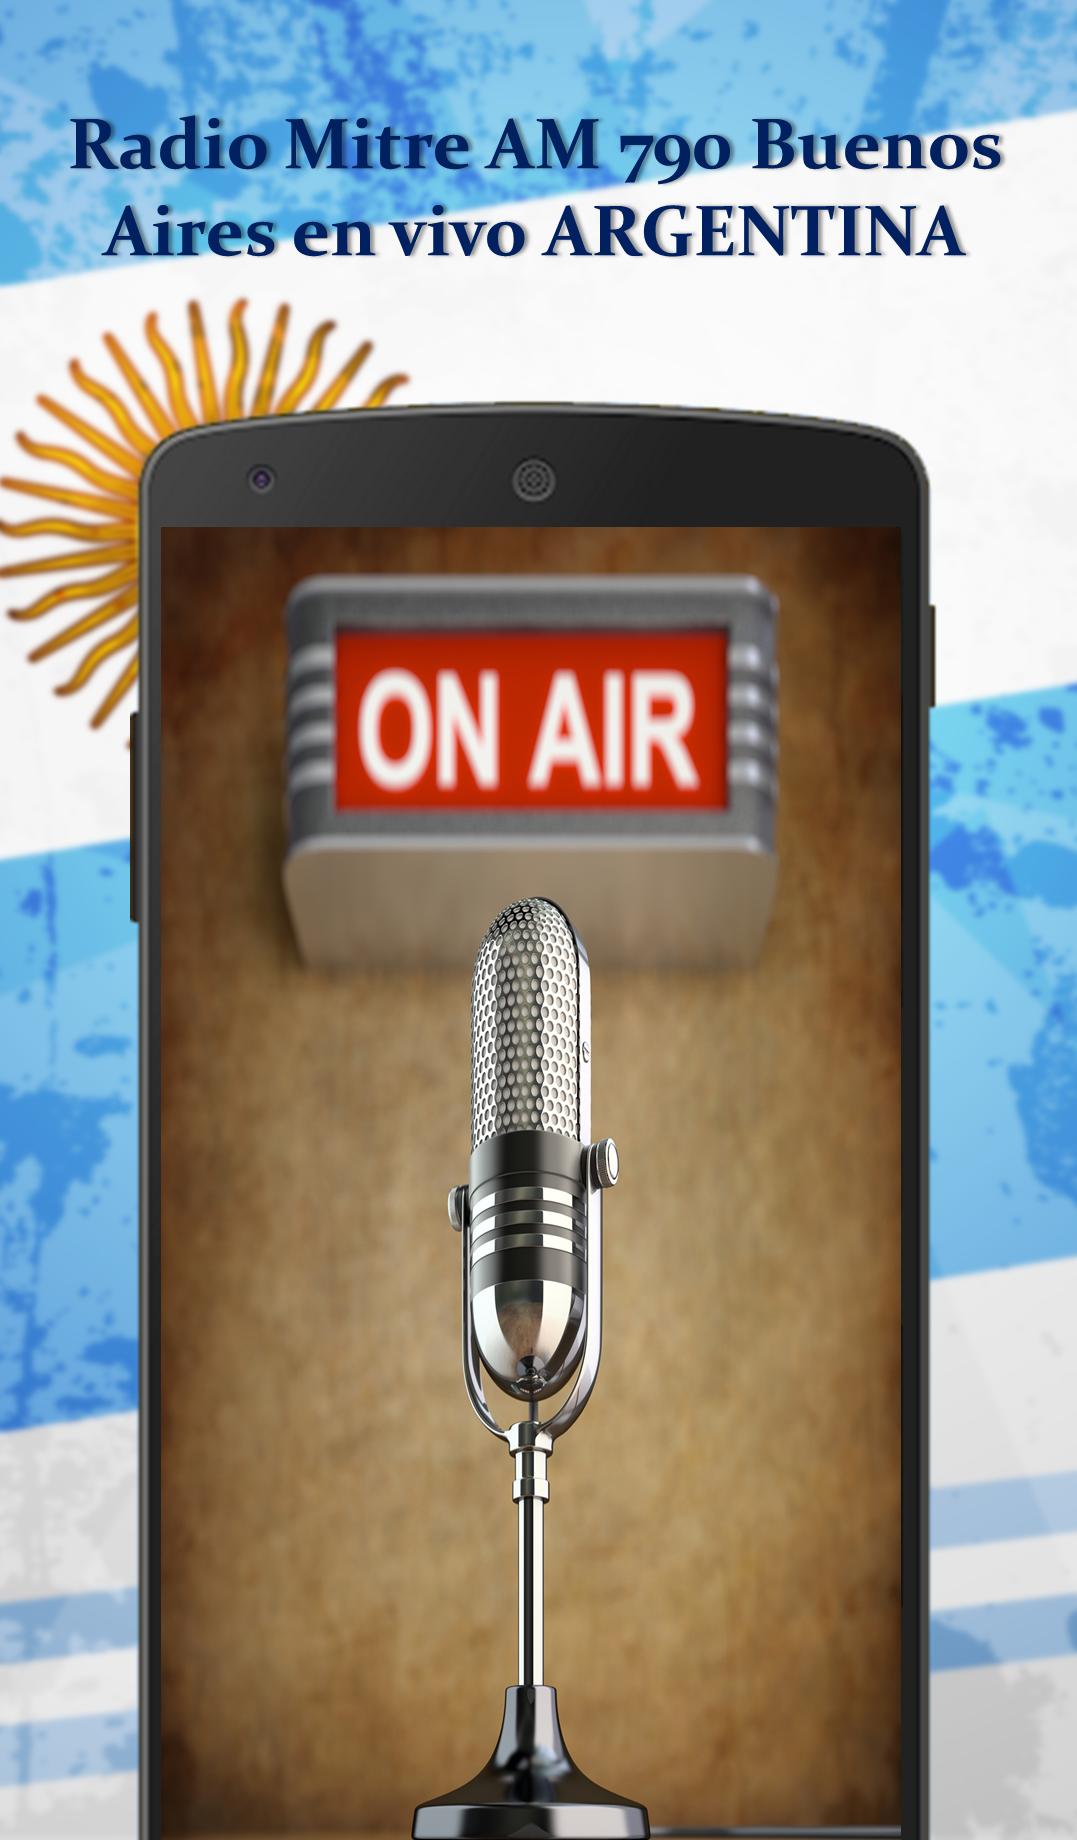 Radio Mitre for Android - APK Download